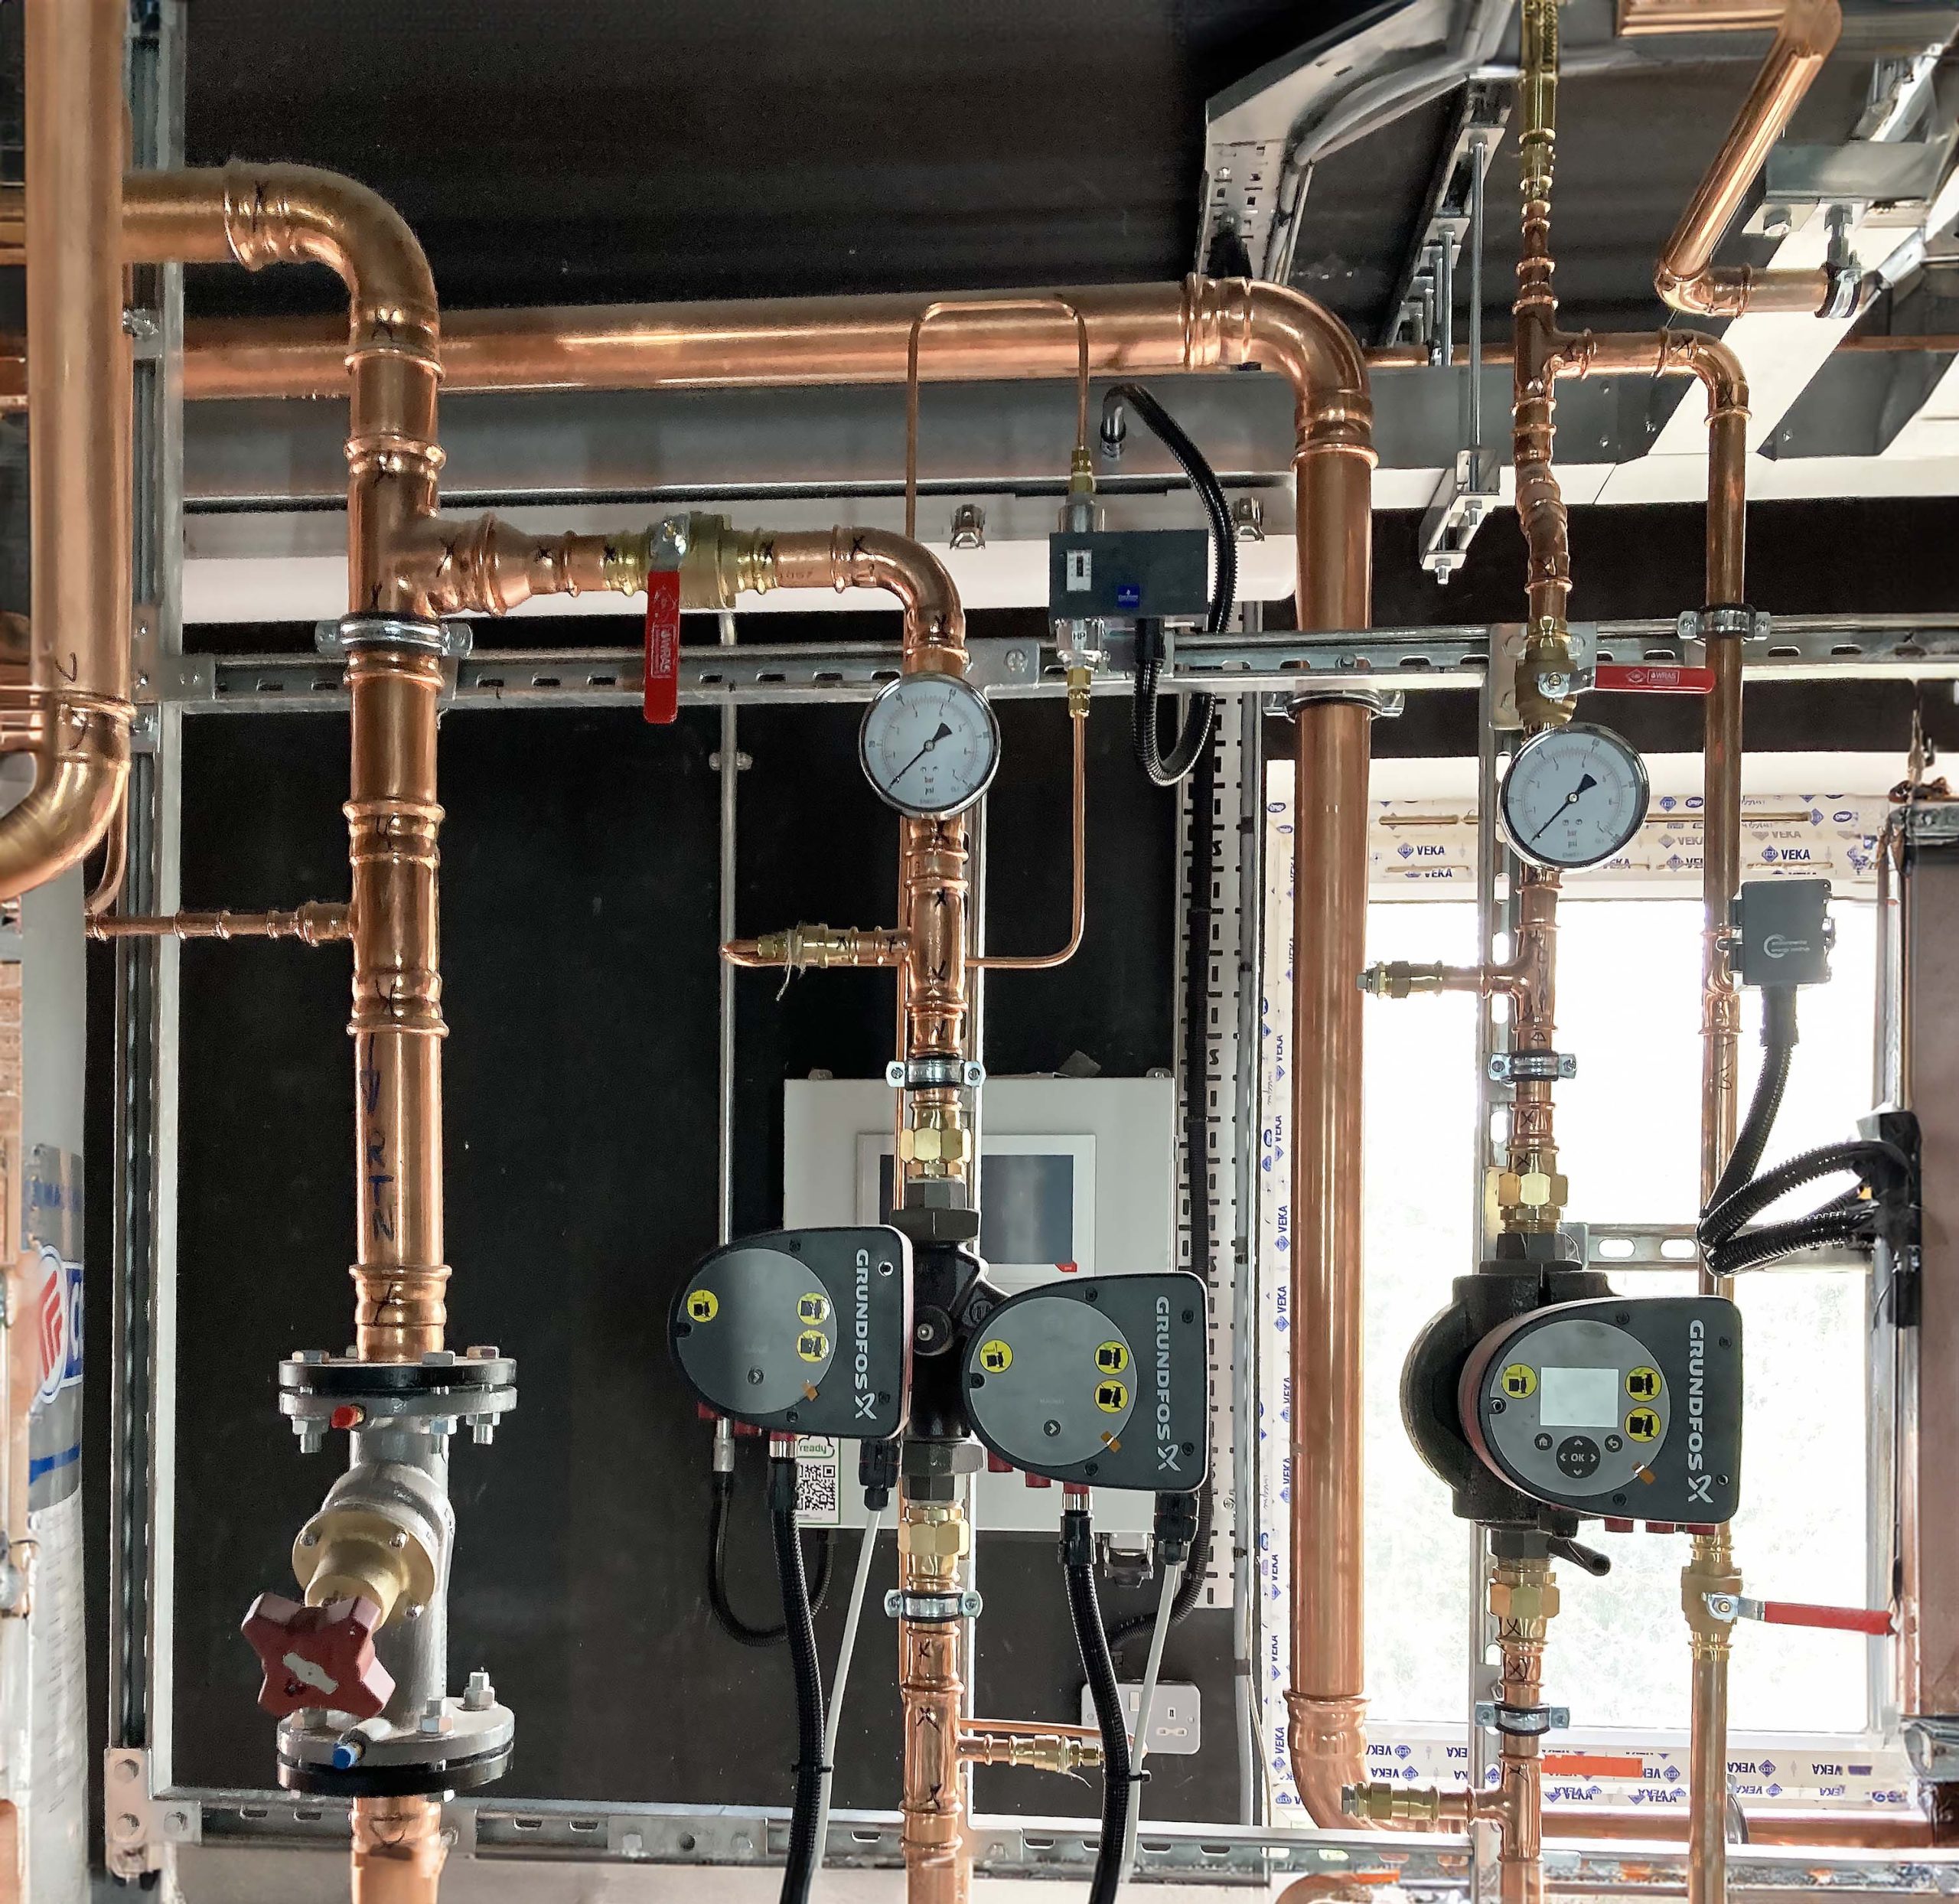 Copper pipes with gauges